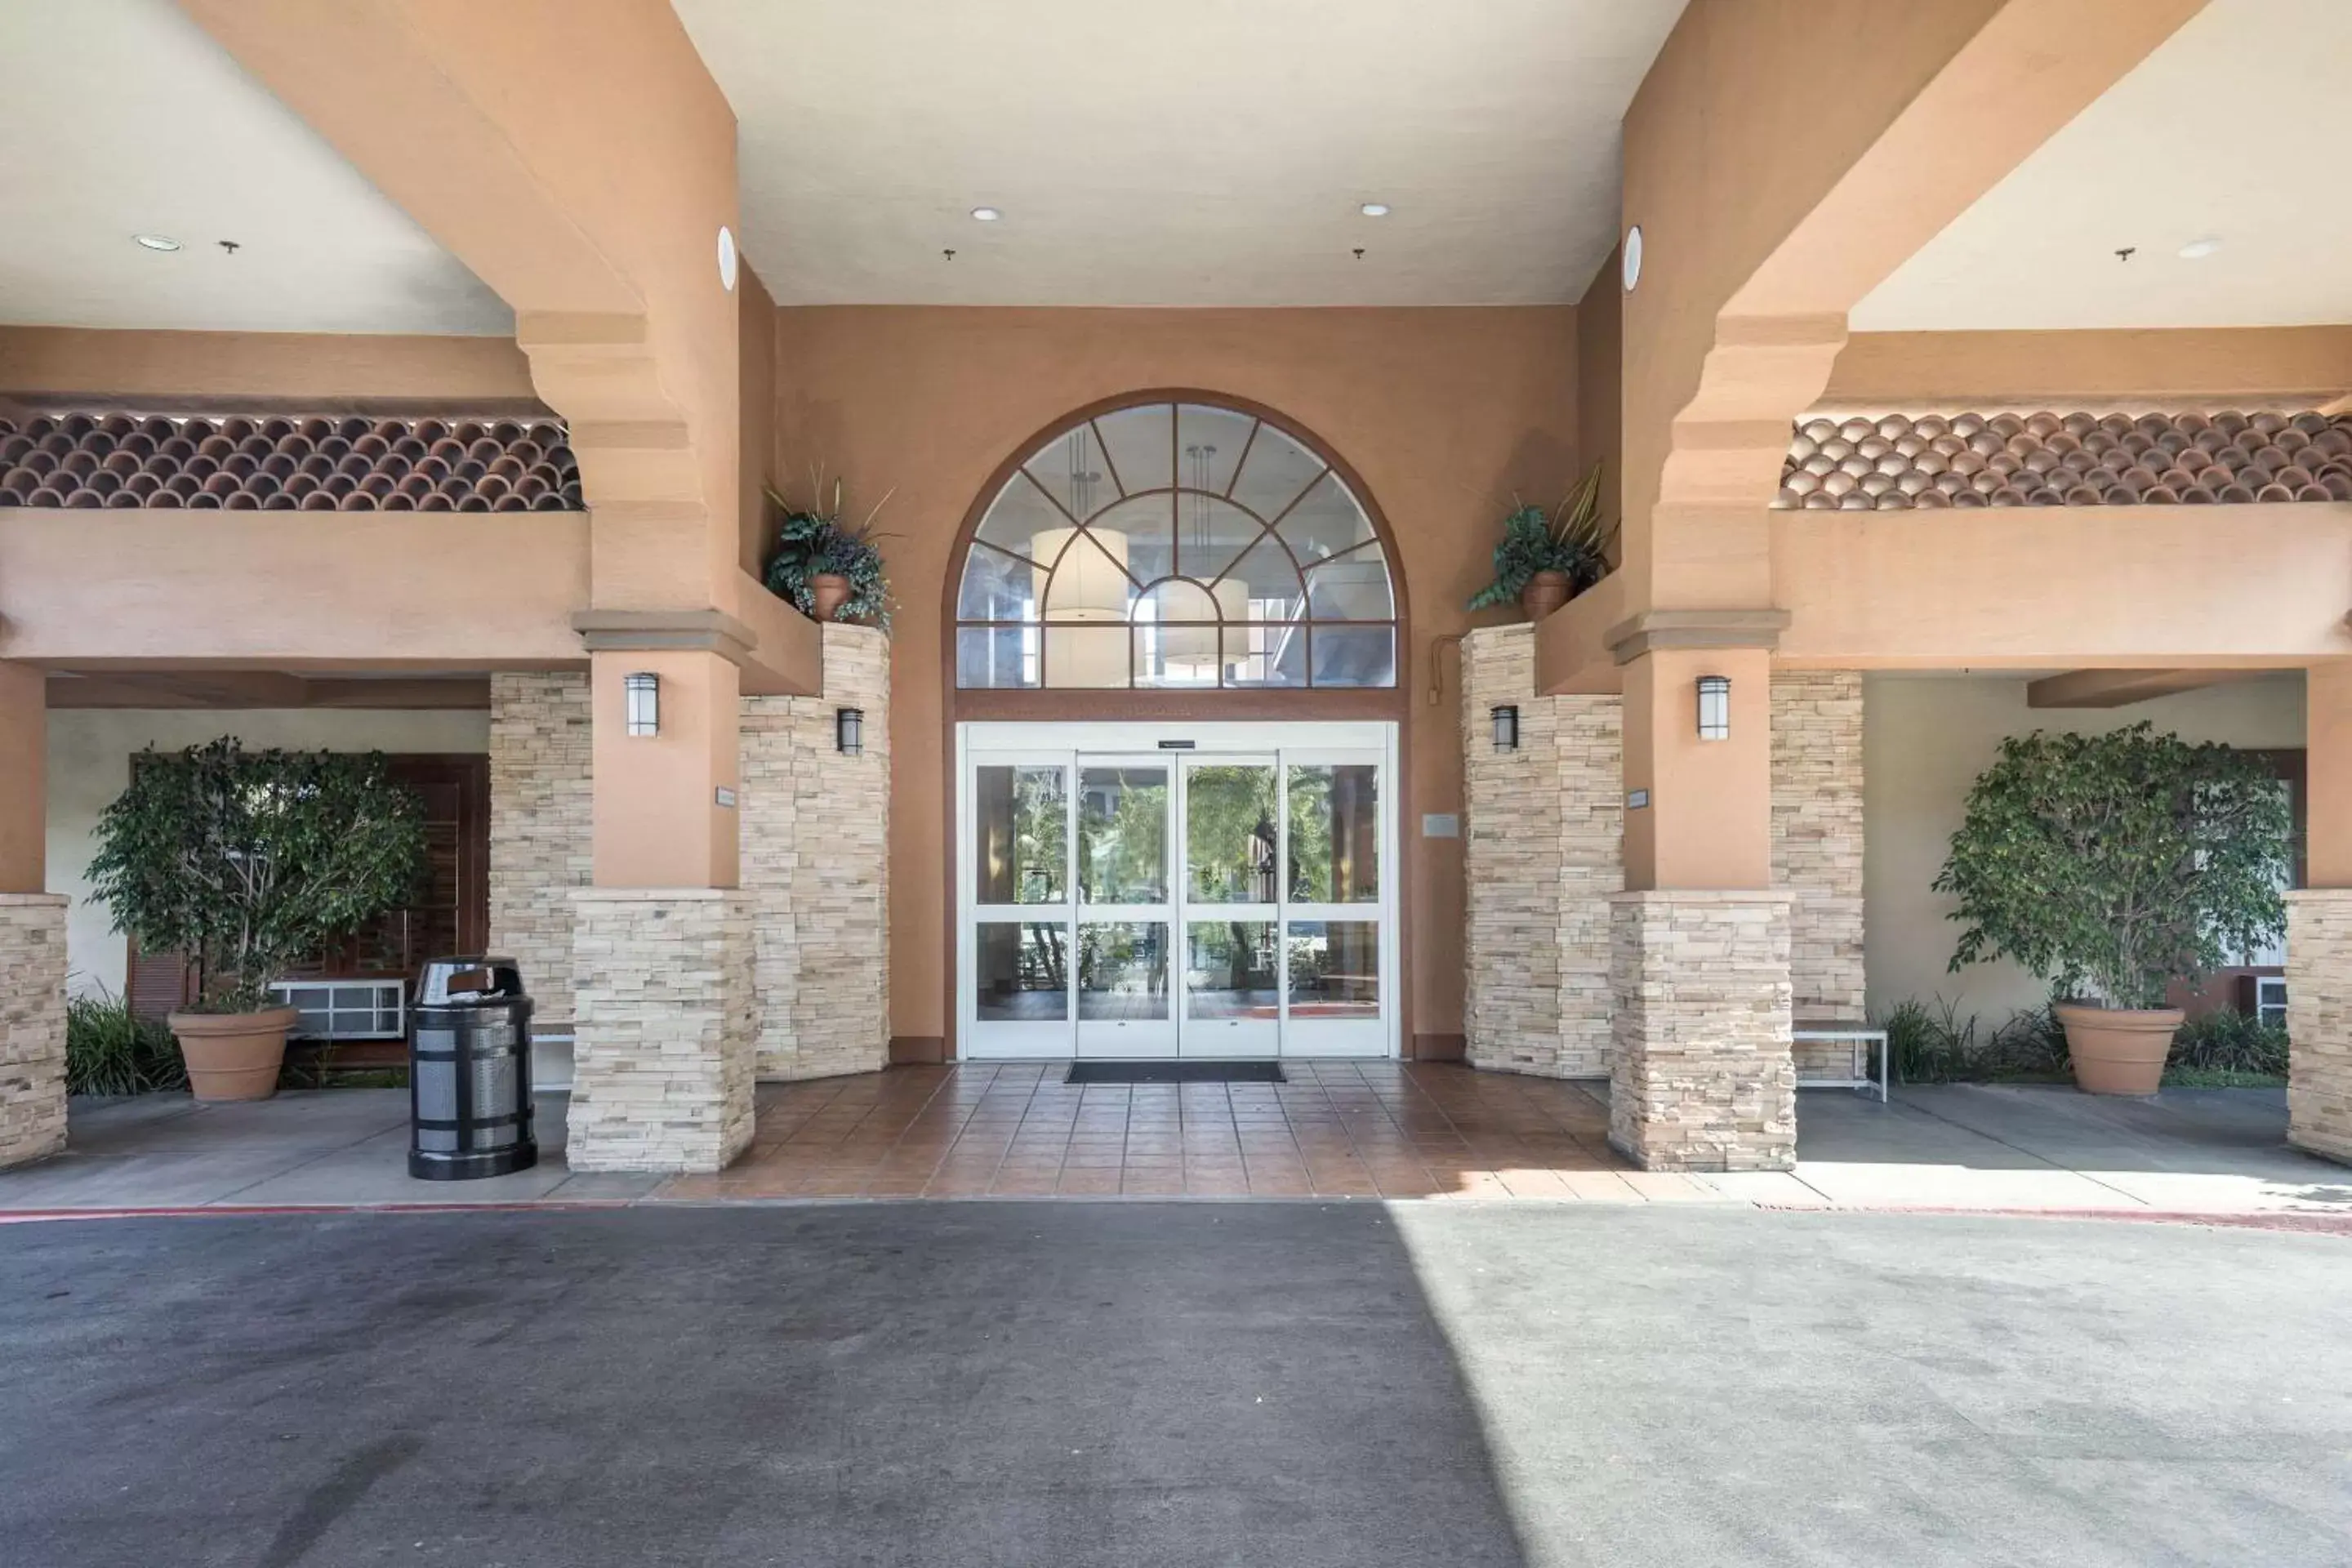 Property building in MainStay Suites John Wayne Airport, a Choice Hotel